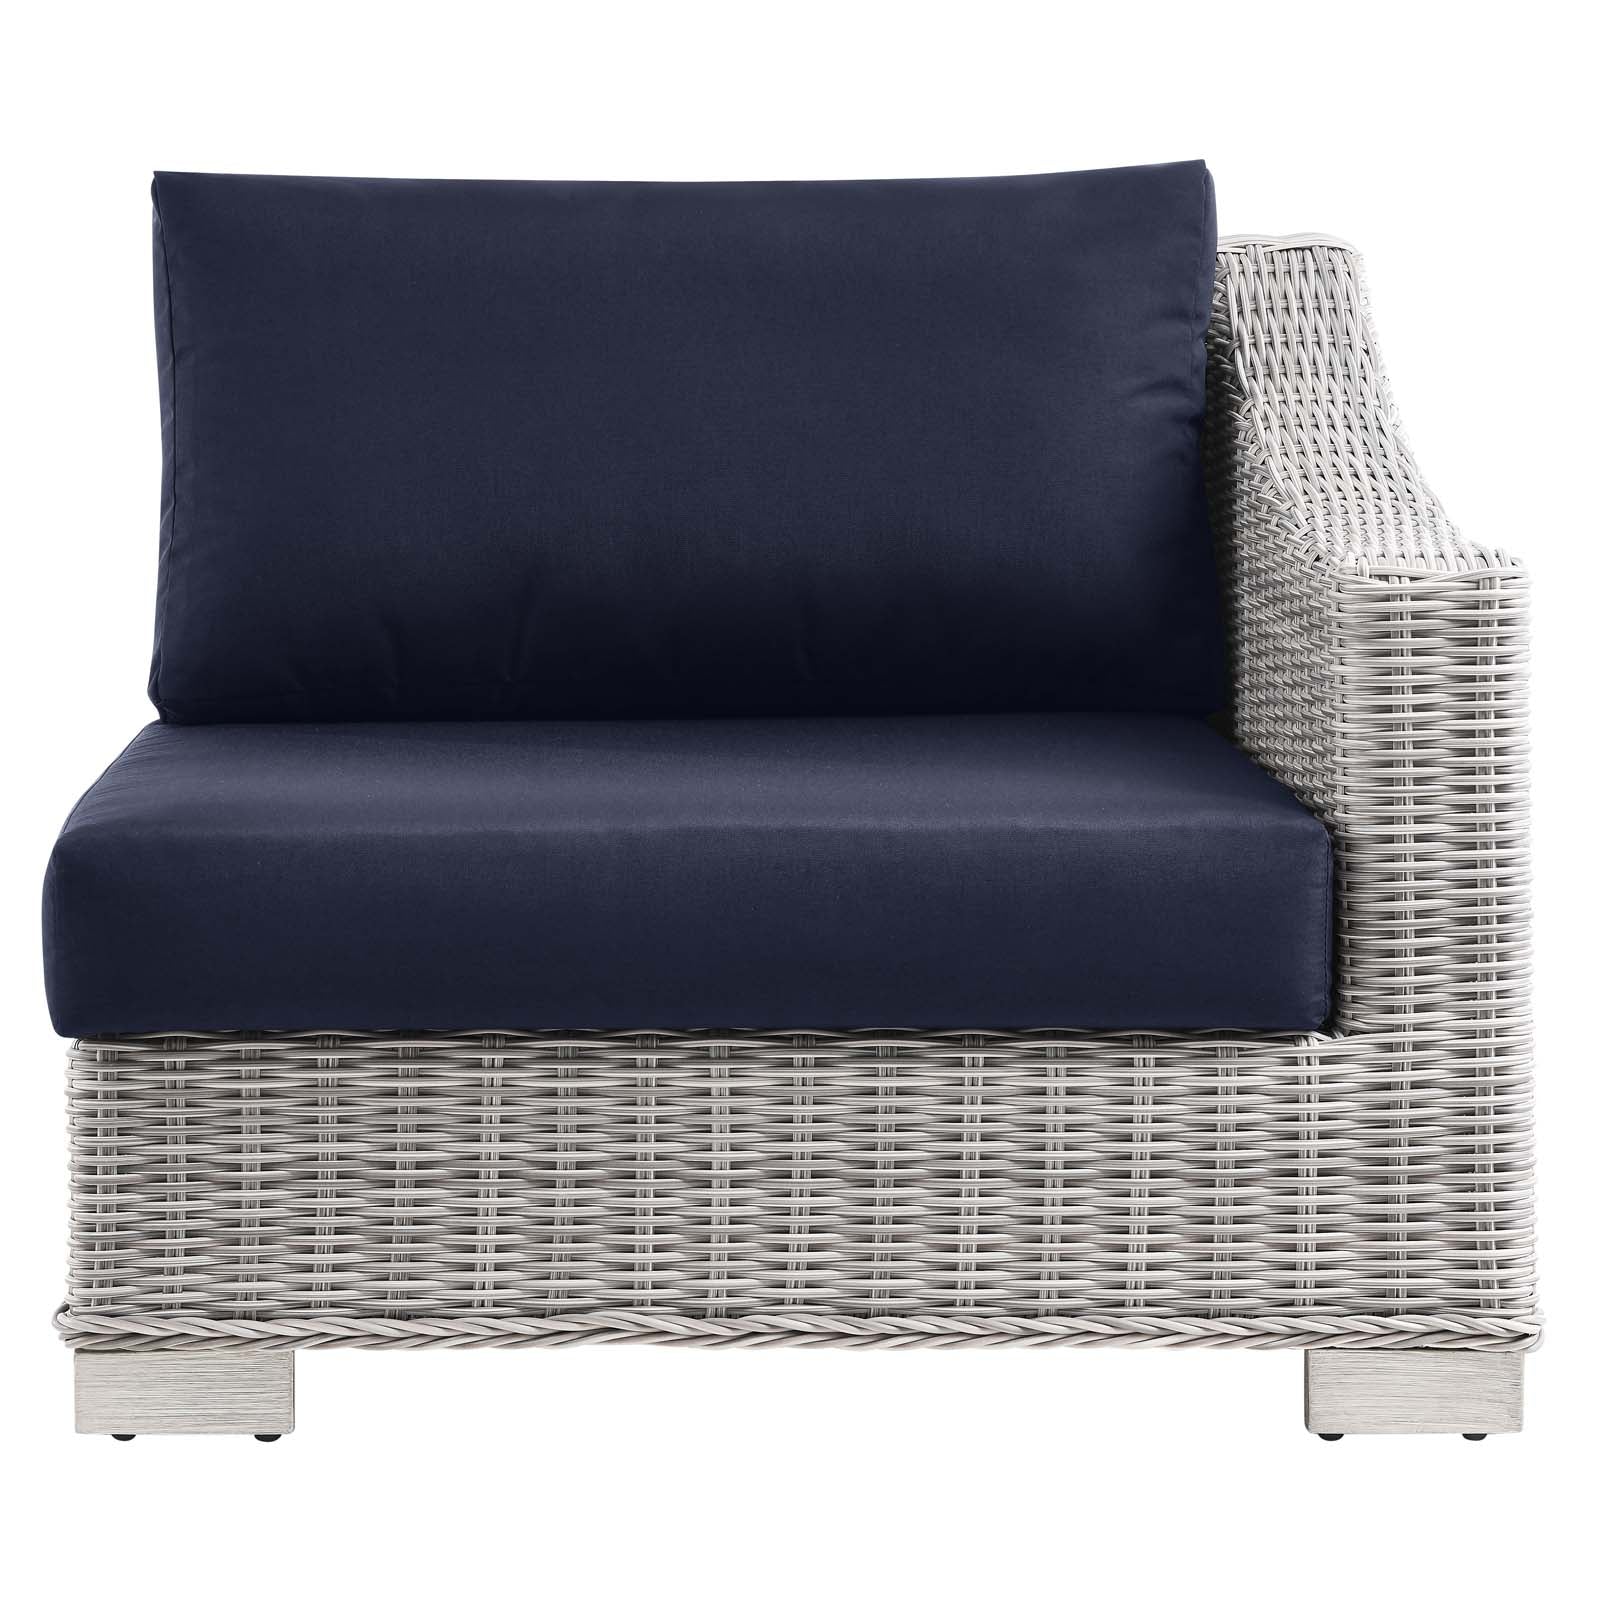 Modway - Conway Outdoor Patio Wicker Rattan Right-Arm Chair - EEI-4846